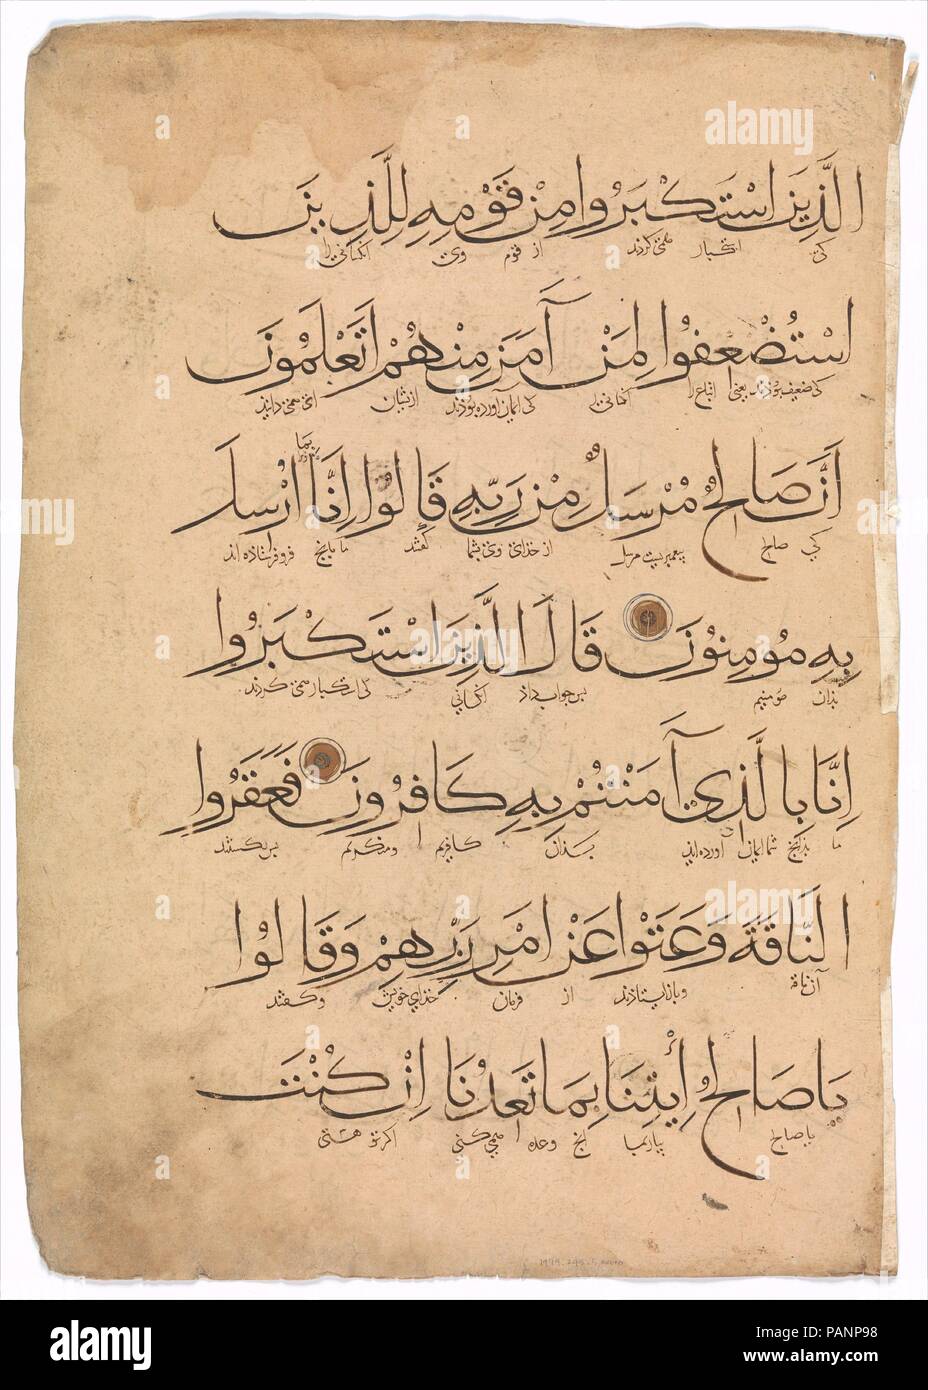 Folio from a Qur'an Manuscript. Dimensions: 19.5 in. high 14.00 in. wide (49.5 cm high 35.6 cm wide). Date: 14th century.  This Qur'an which probably belongs to fourteenth century Iran is written in muhaqqaq script. Each folio has seven lines with interlinear Persian translation in naskhi script. The verses 75-81of this folio belong to the tenth section of Surah al-A'raf (chapter 7), which gives the account of Prophet Salih and Lot. The marginal medallion on the verso is employed for ornamental purpose. Museum: Metropolitan Museum of Art, New York, USA. Stock Photo